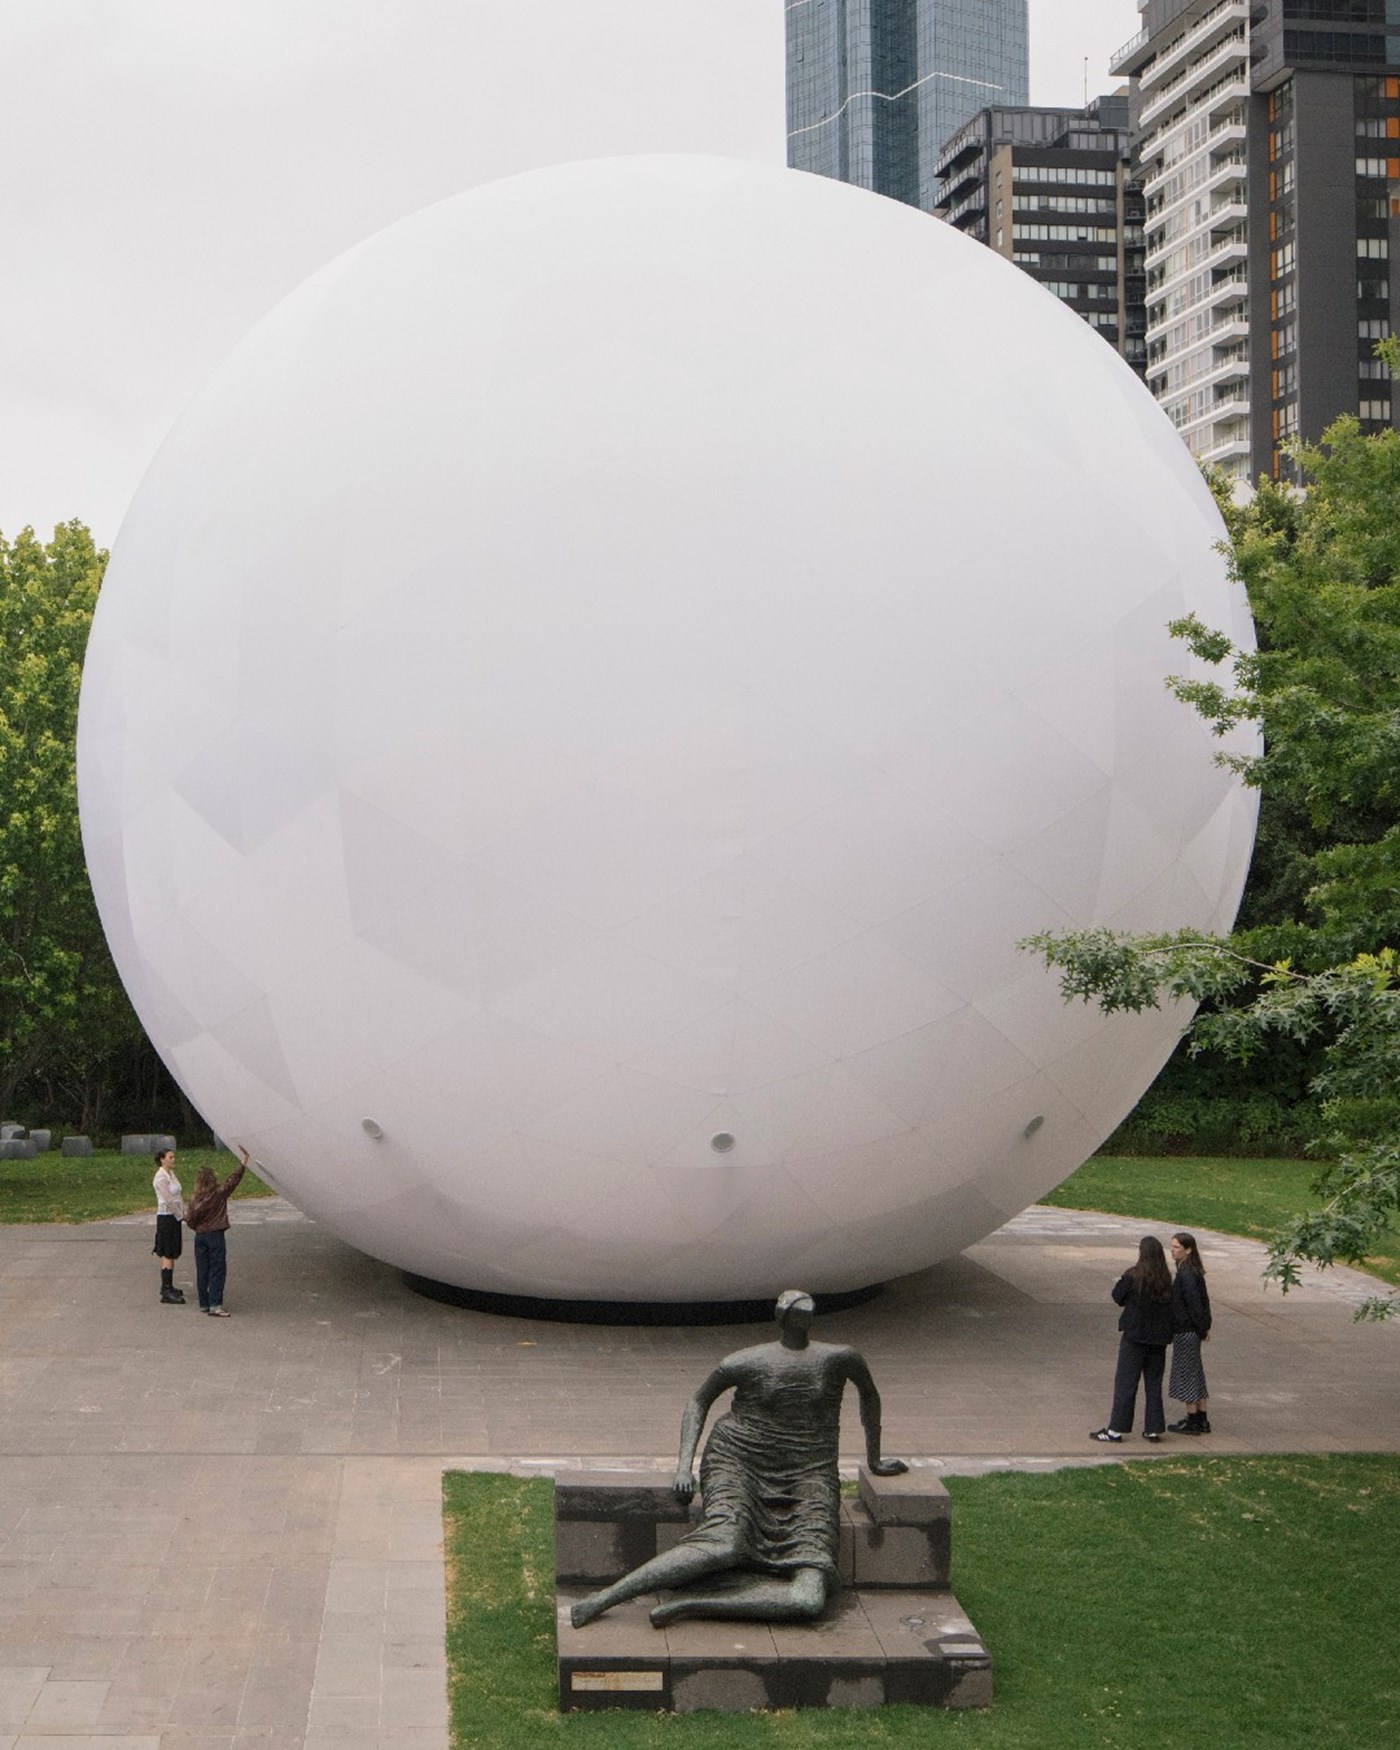 This Is) Air: The NGV's new public artwork is a sphere that can breathe